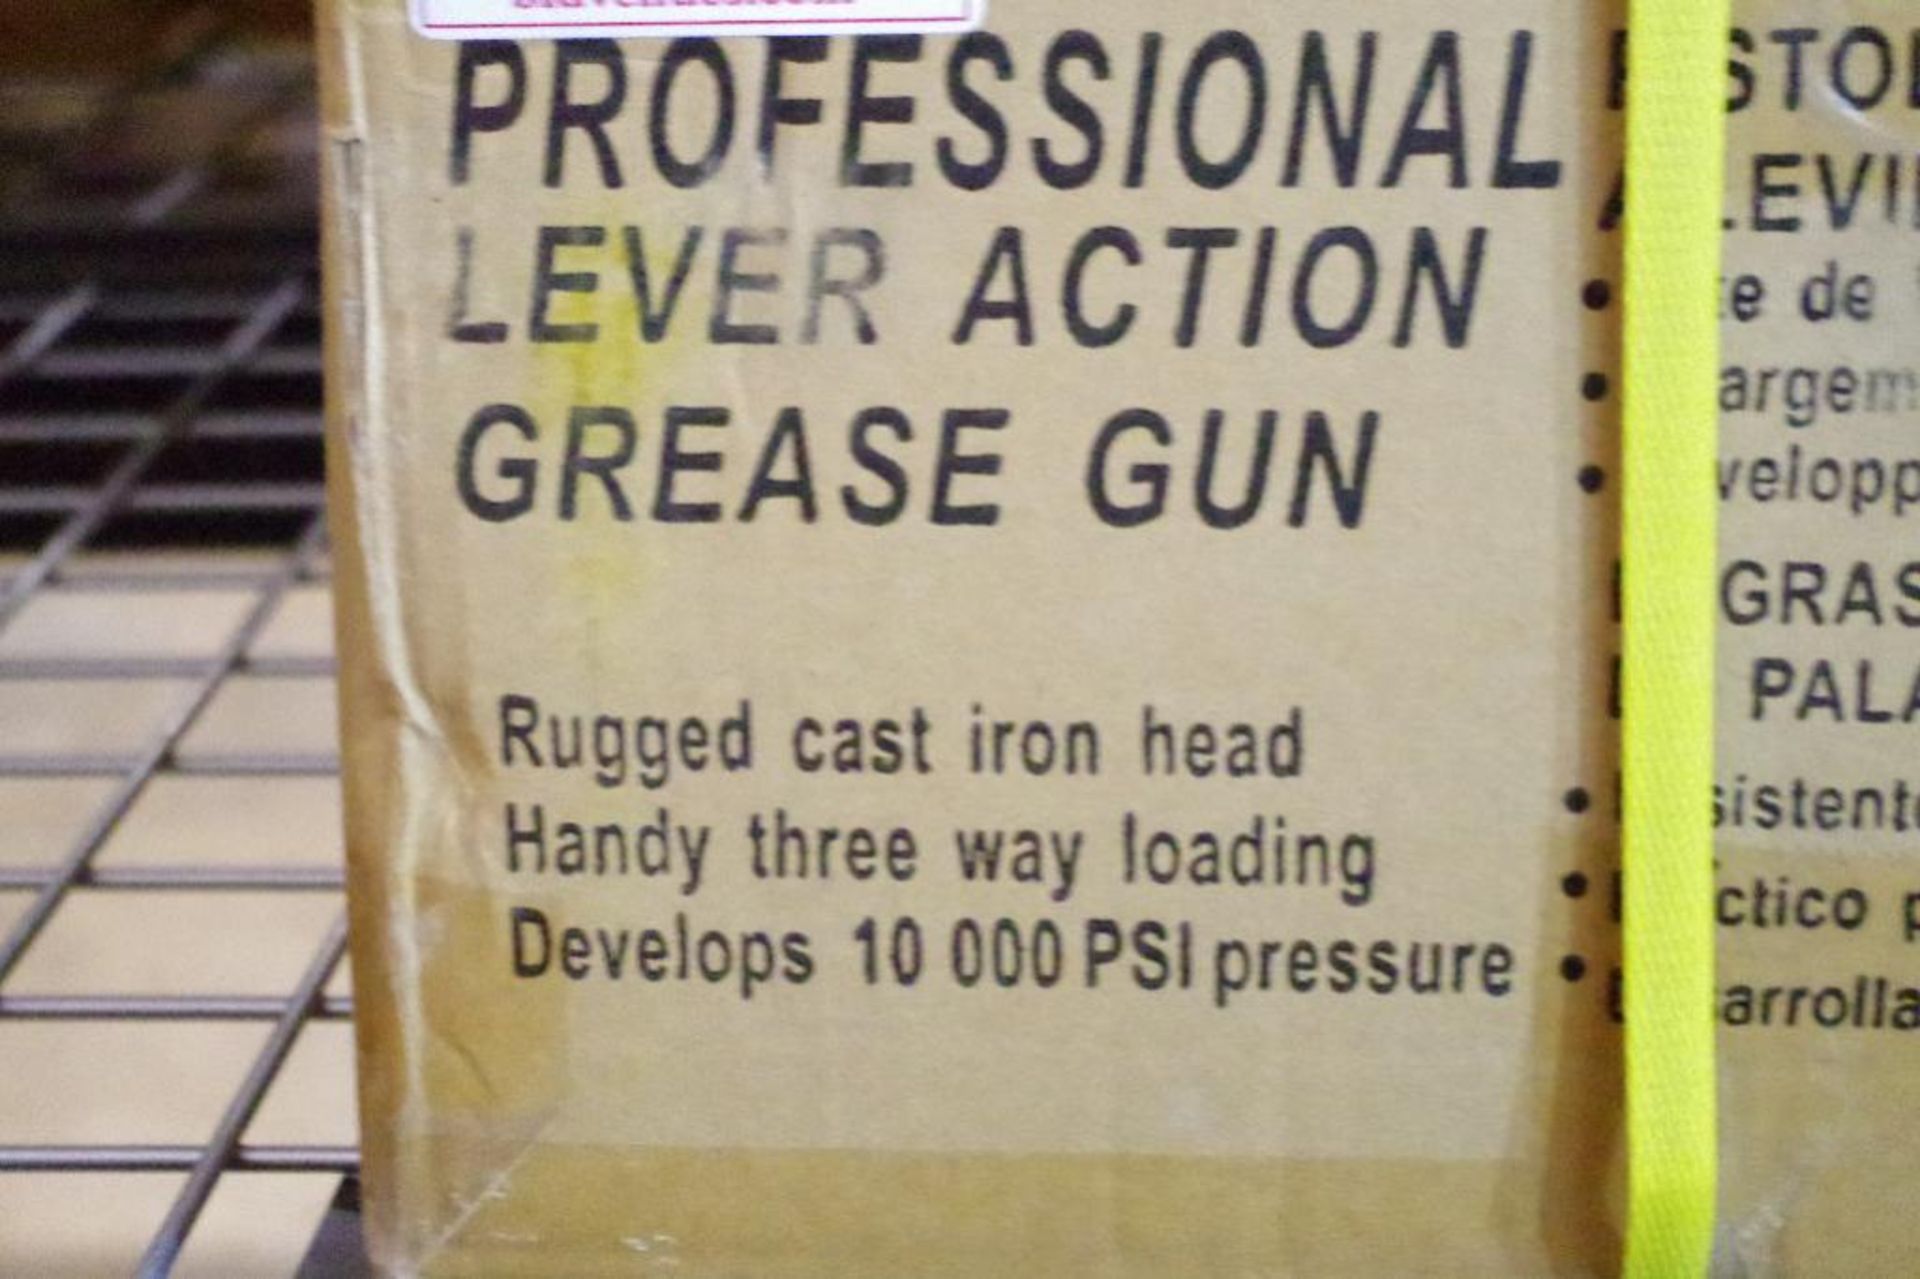 [12] NEW LINCOLN Professional Lever Action Grease Guns (1 Box of 12 Each) - Image 2 of 4